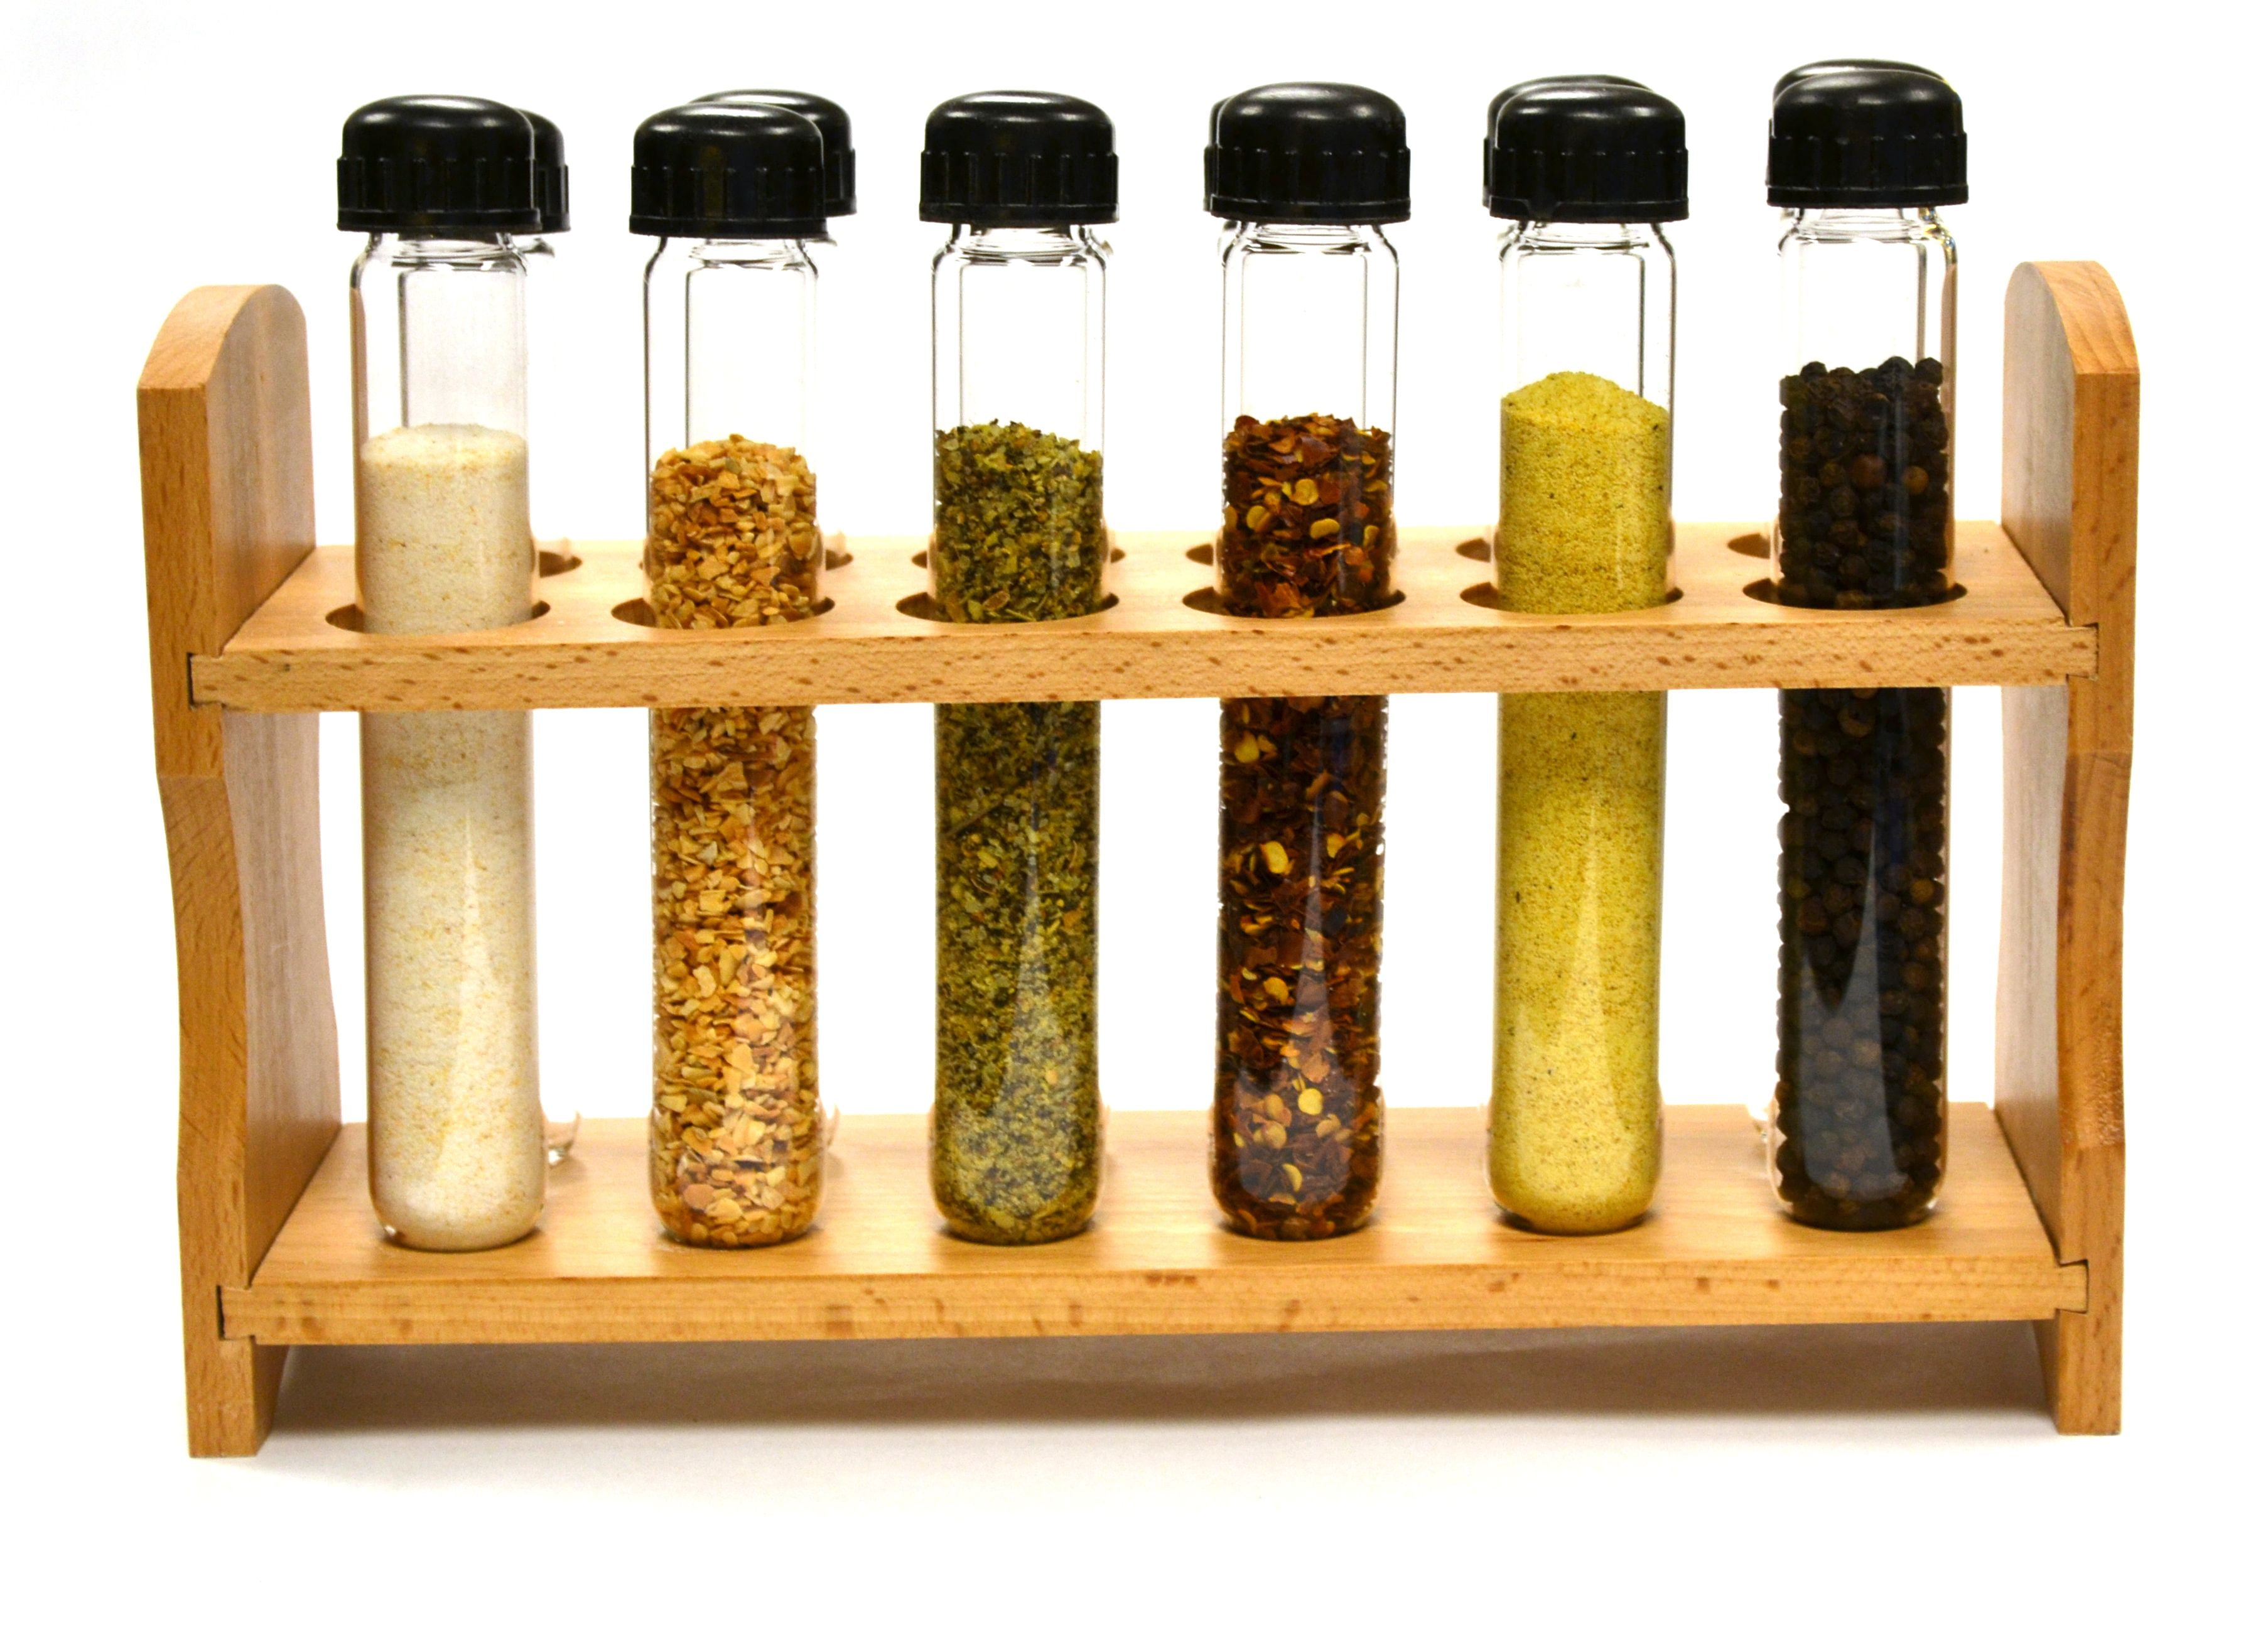 Chemistry Spice Rack Set 8 Glass Test Tubes With Cork Stoppers Wooden Herb Organizer Elegant Kitchenware Seasoning Container